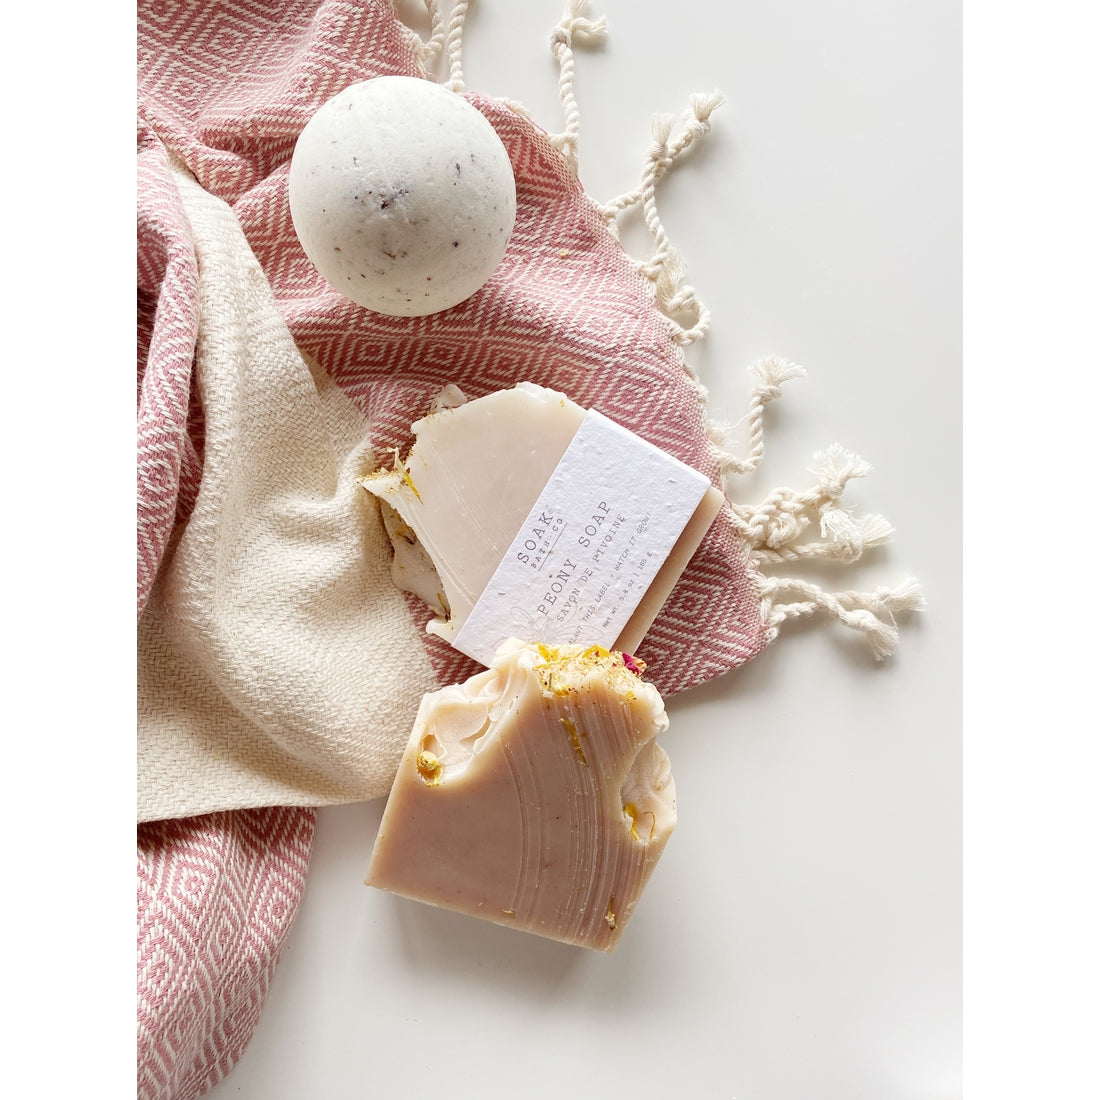 Handmade SOAK Bath Co. - Peony Soap Bars and a bath bomb displayed on a textured white surface alongside a pink and white patterned towel with tassel details.